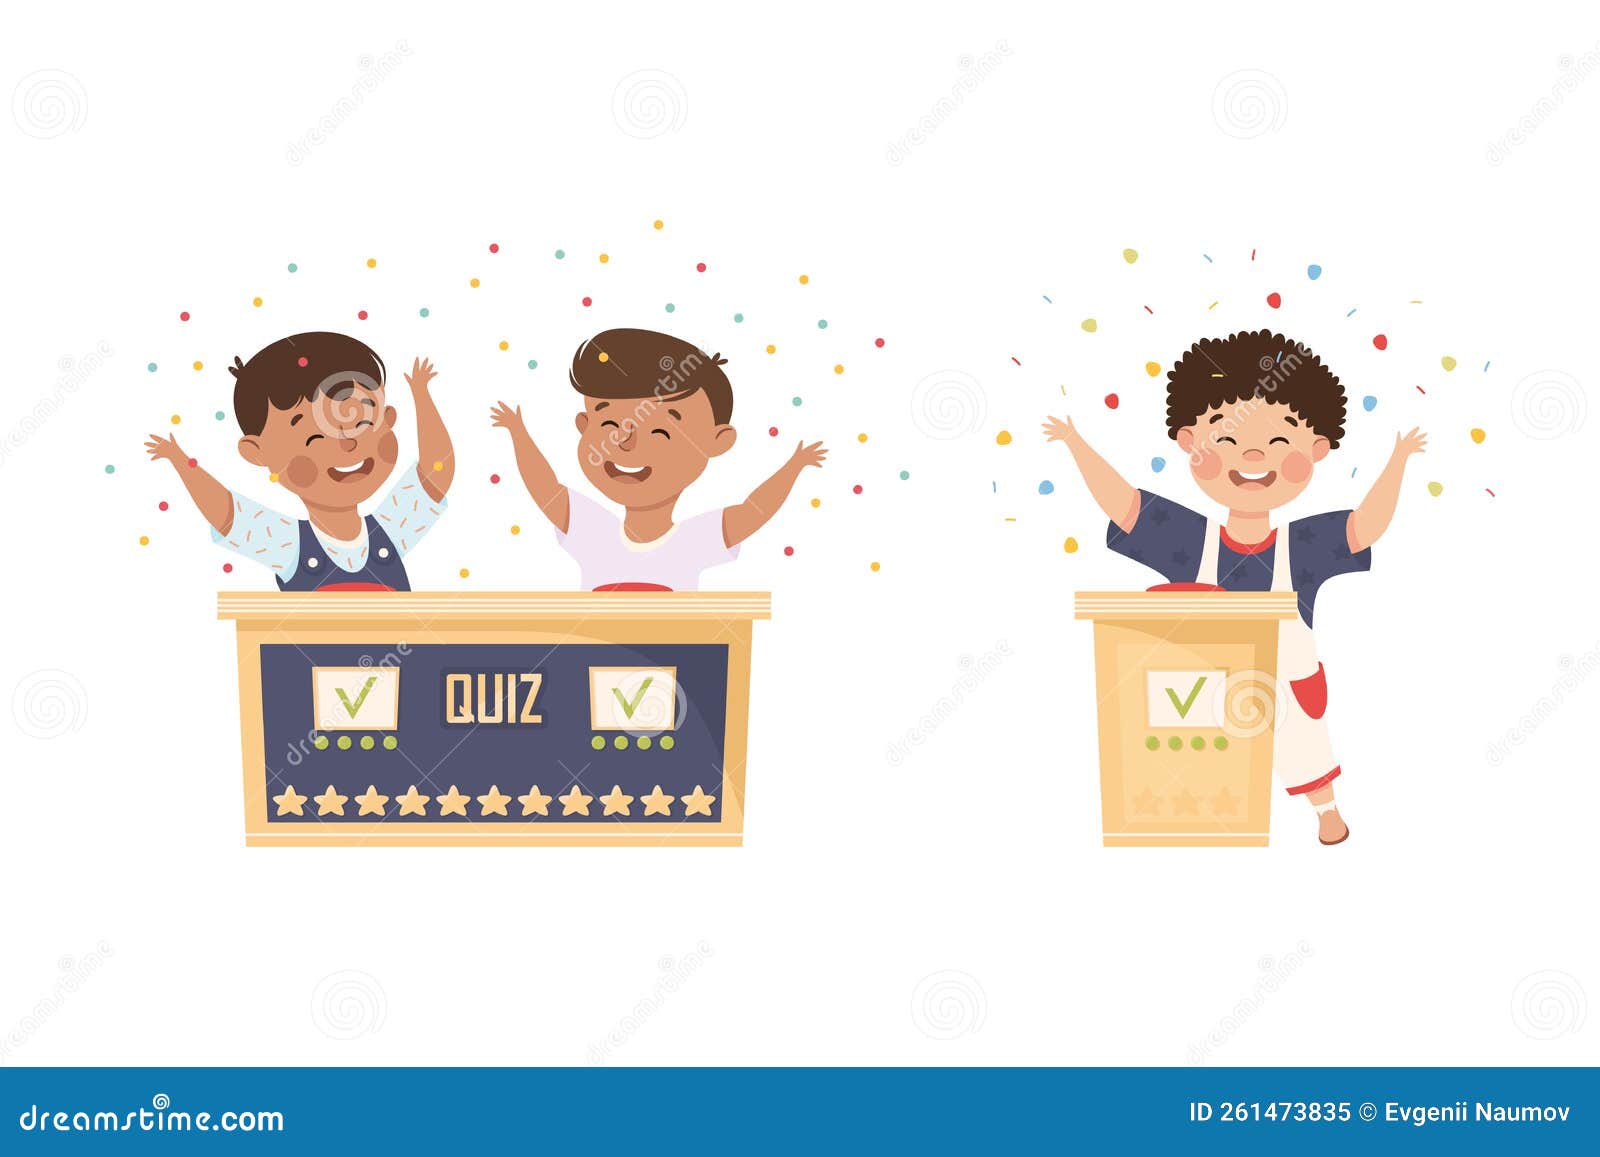 Kids Playing Quiz Game Answering Questions Standing At The Stand With  Buttons. Girl Pressed The Buzzer First And Raised Hand Up. Colorful Flat  Style Cartoon Vector Illustration. Royalty Free SVG, Cliparts, Vectors